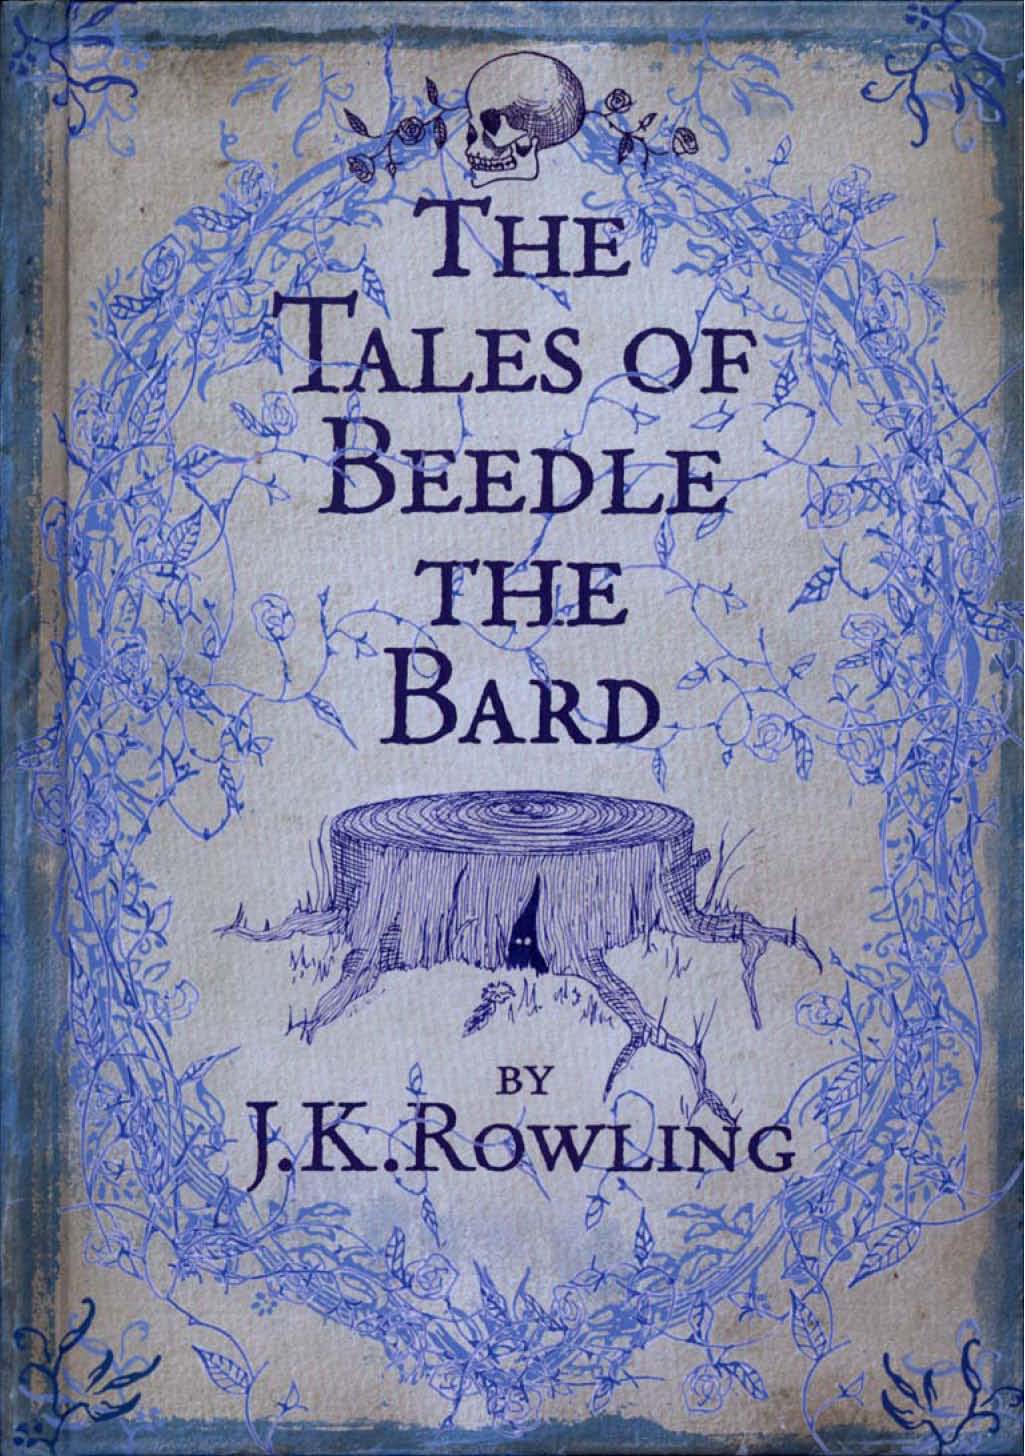 The Tales of Beedle the Bard - J. K. Rowling [kindle] [mobi]